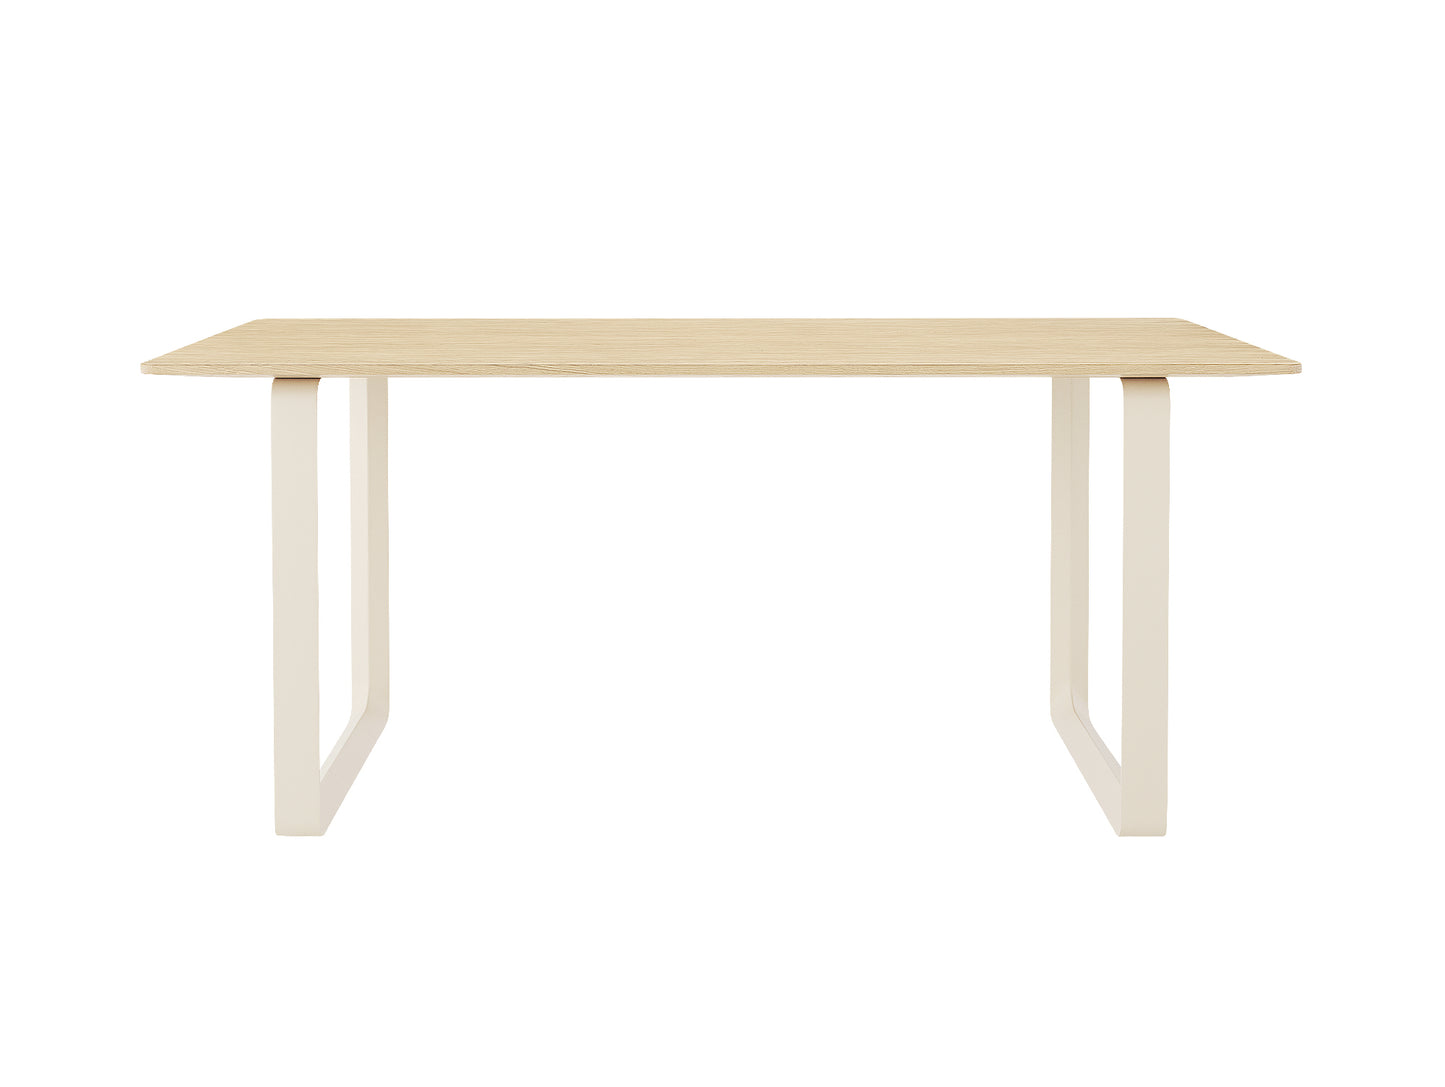 70/70 Table - Solid Oak Table Top with Sand Base / 170 x 85cm